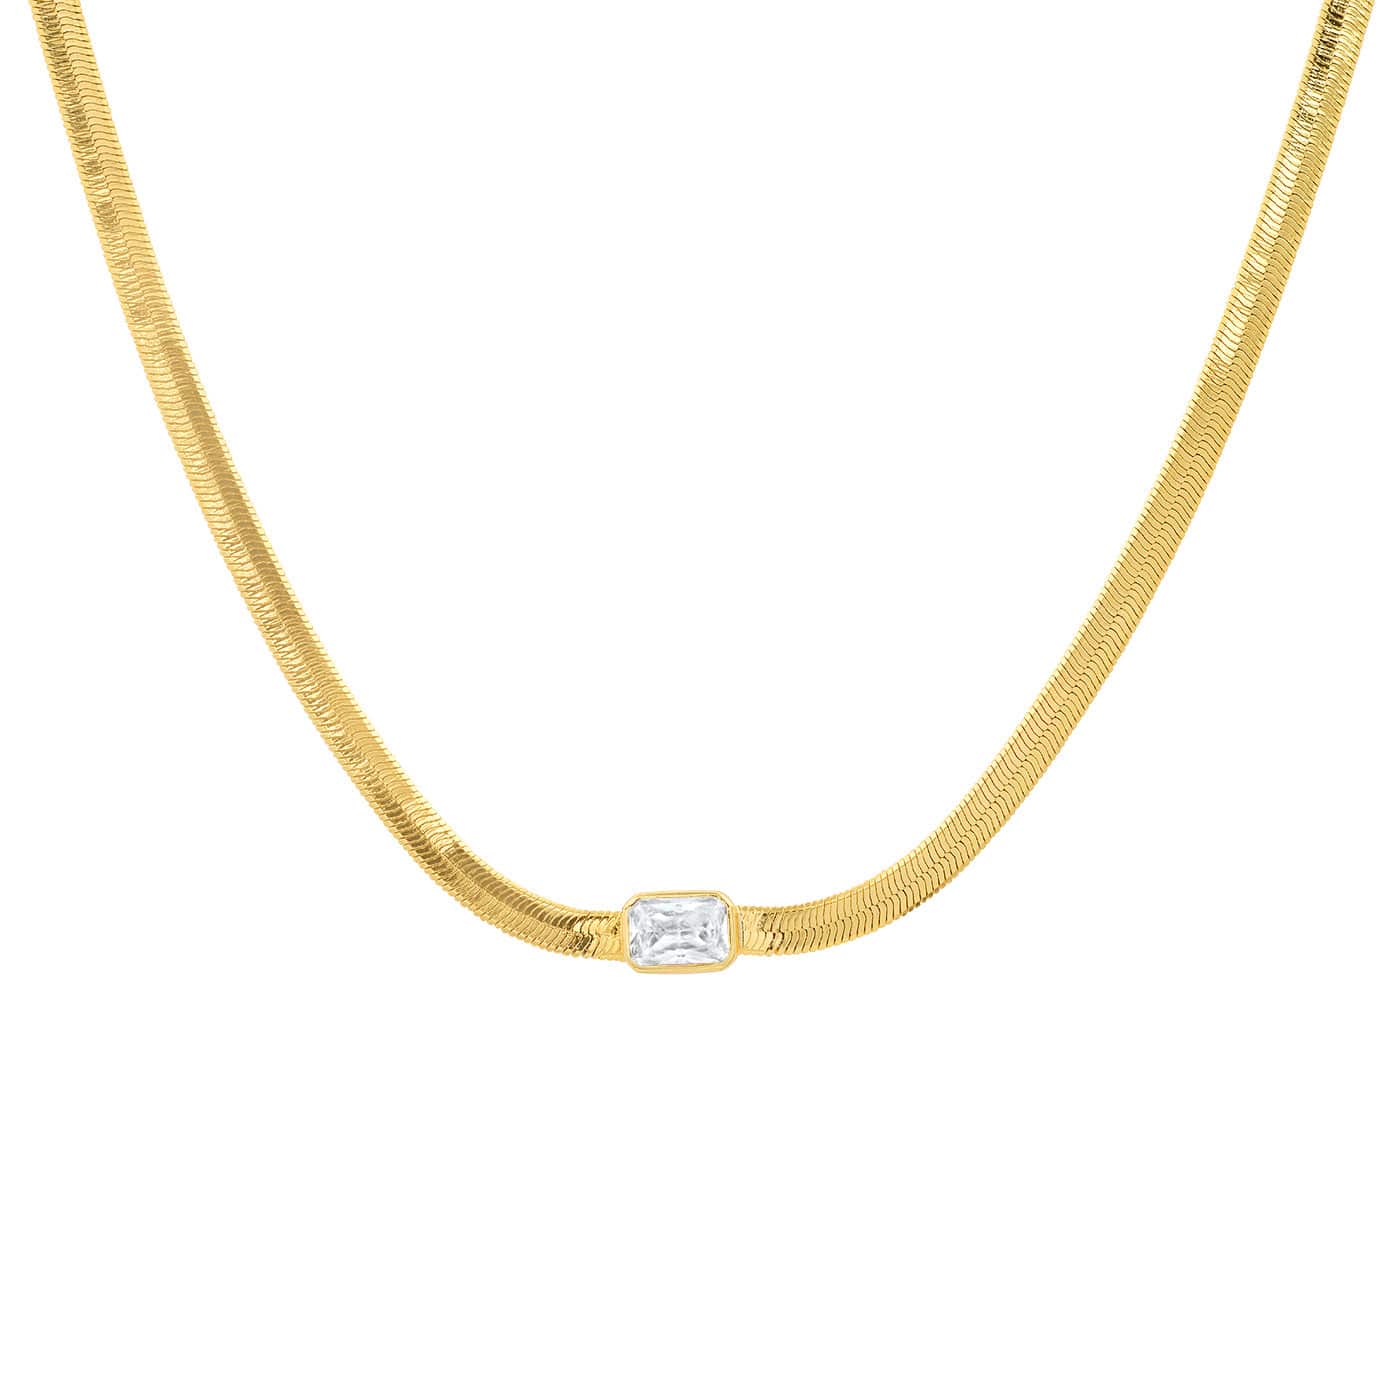 TAI JEWELRY Necklace CLEAR Gold Herringbone Chain with Center Stone